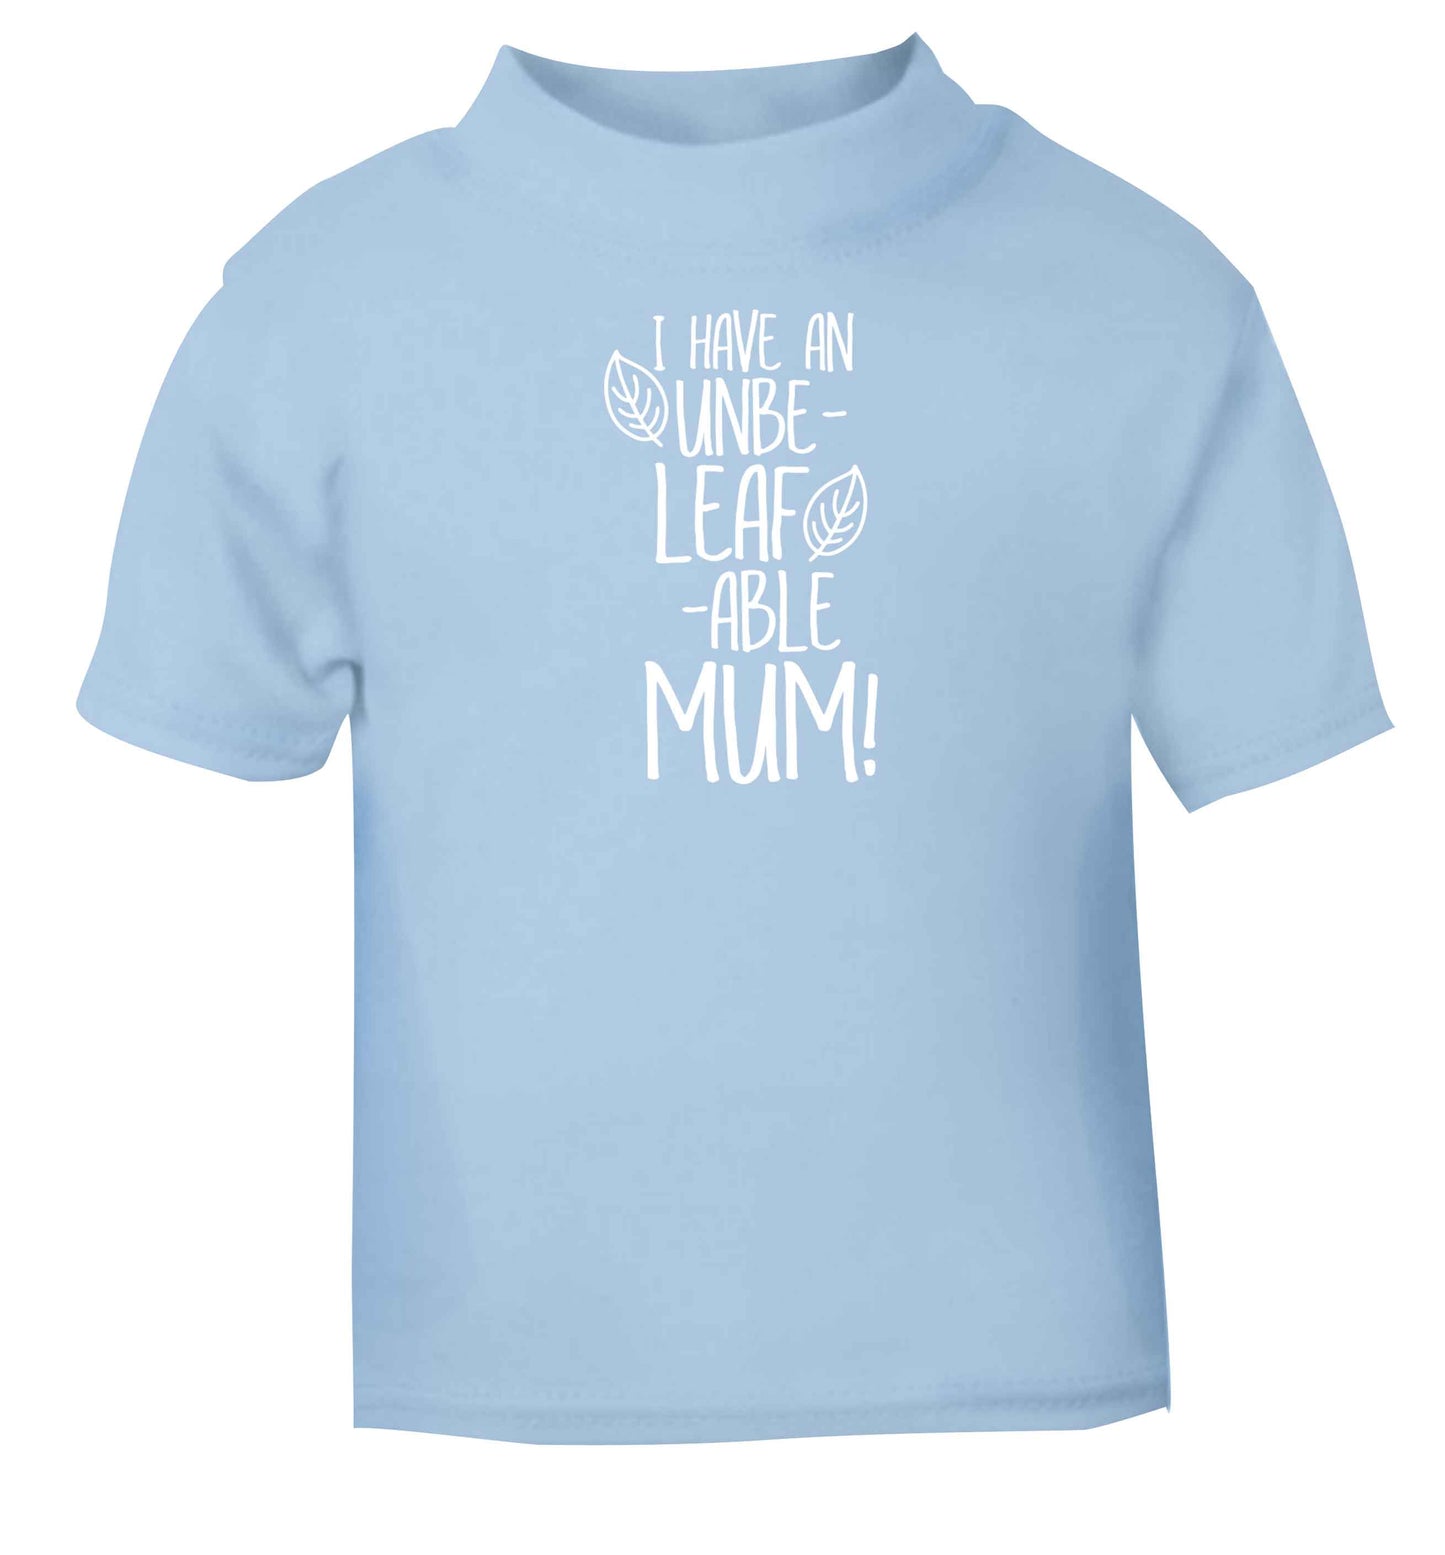 I have an unbeleafable mum! light blue baby toddler Tshirt 2 Years